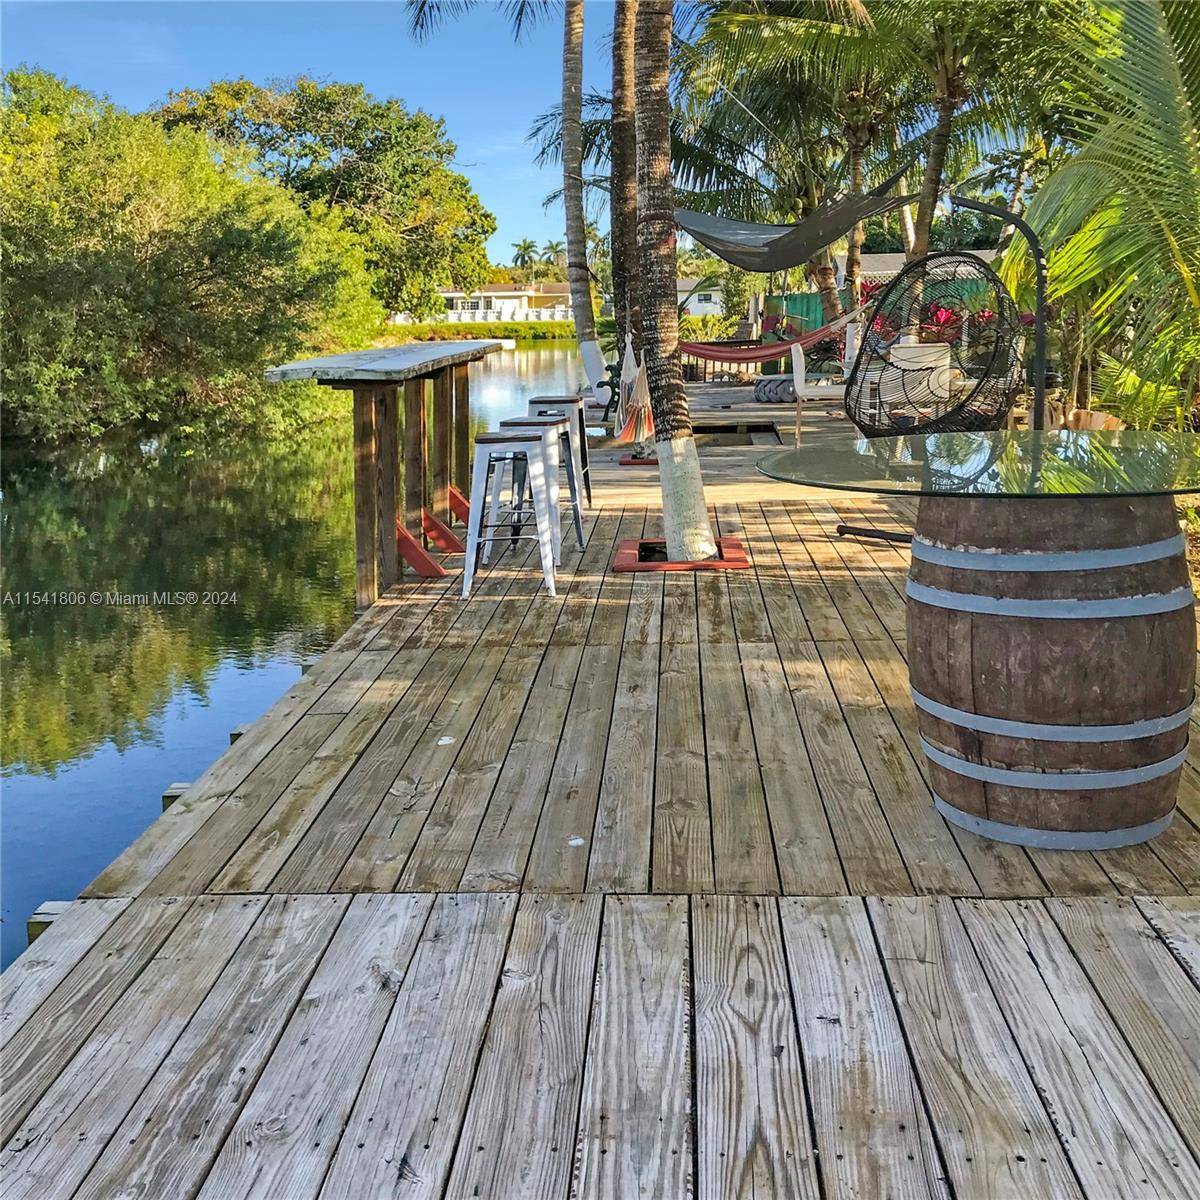 Welcome to this beautiful canal front home in Palmetto Bay.